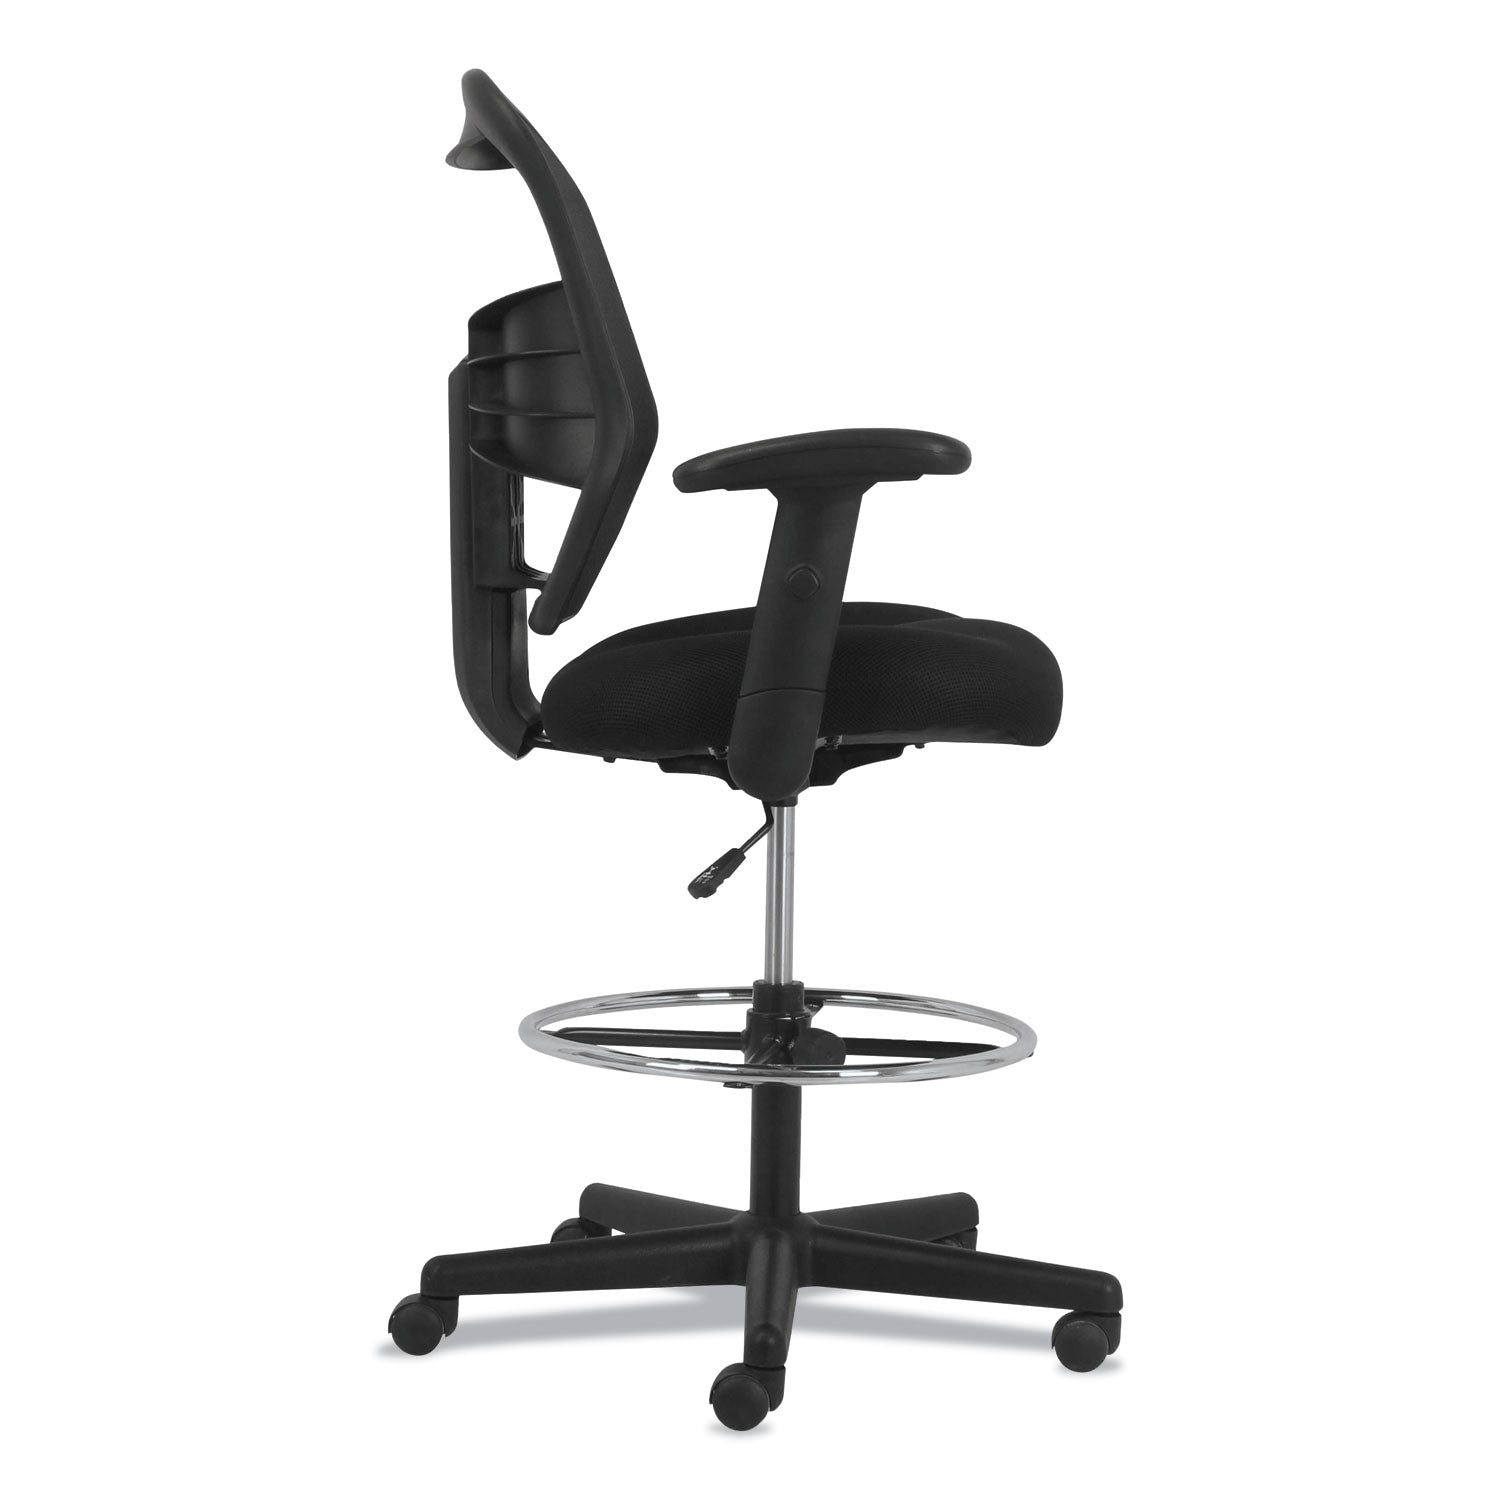 prominent-high-back-task-stool-supports-up-to-250-lb-21-to-281-seat-height-black_honvl539mm10 - 3